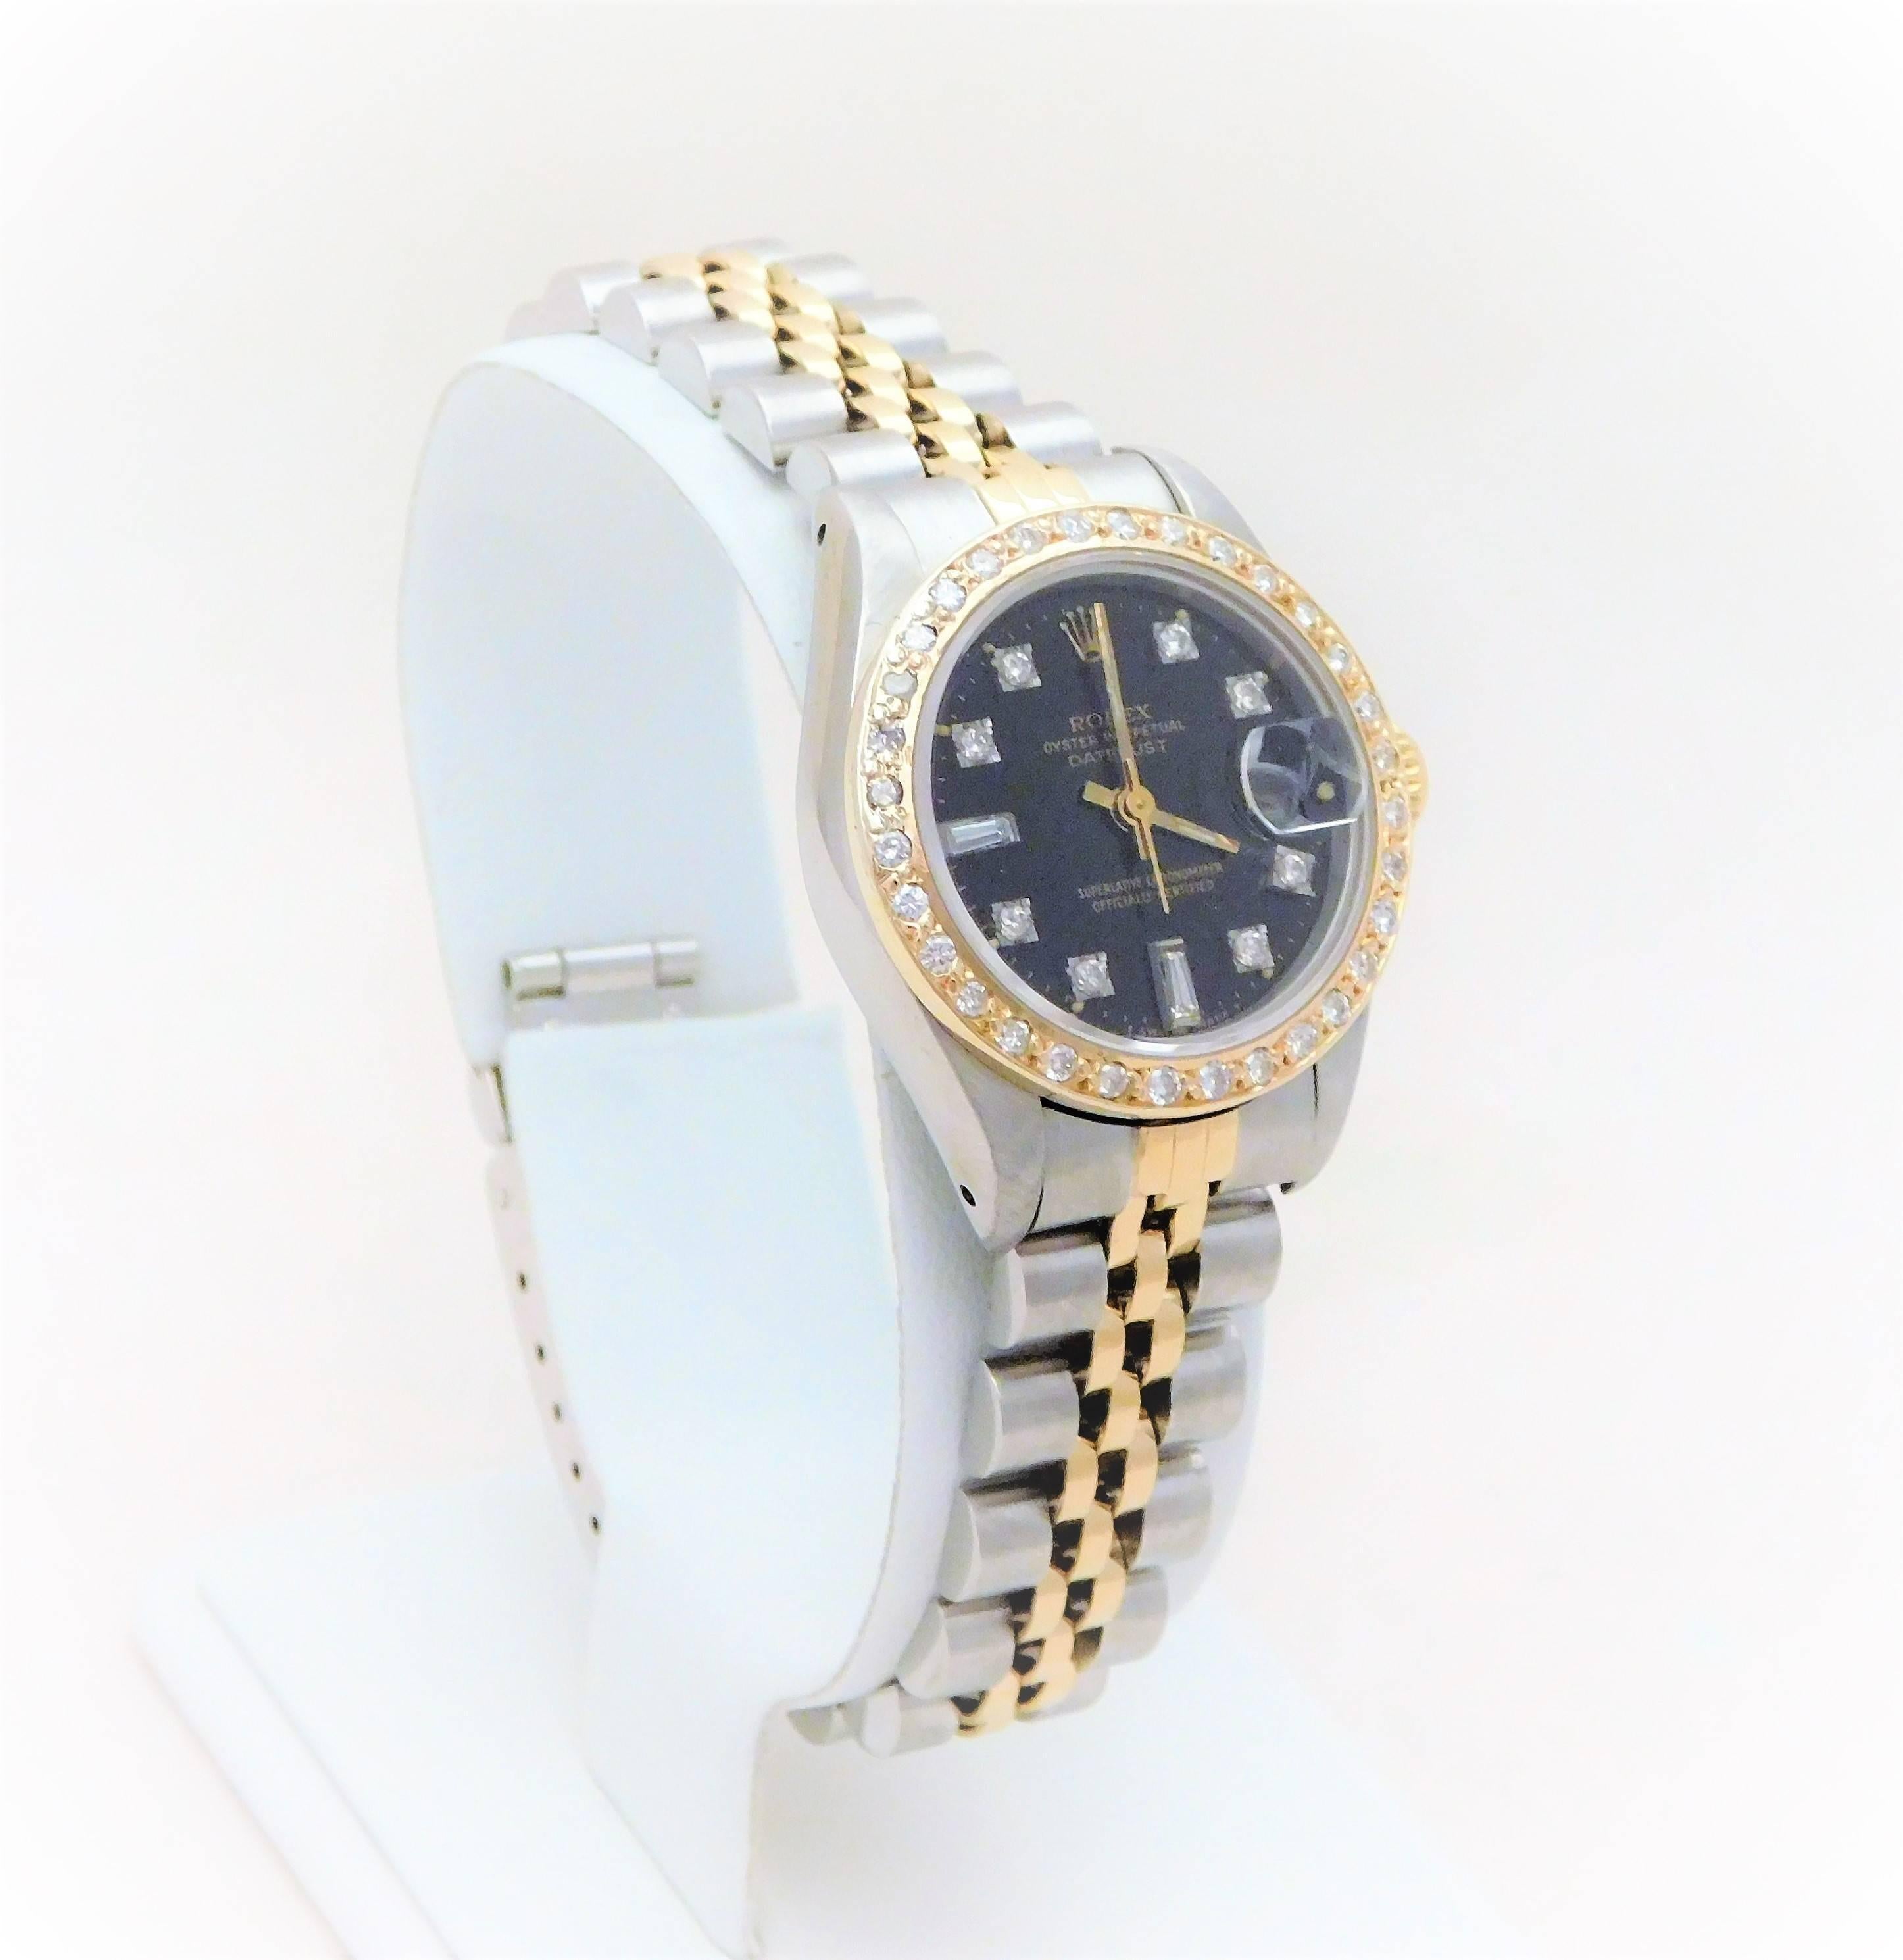 The Rolex Date Oyster Perpetual is one of the most sought-after lady’s luxury time pieces in the world. It is a symbol of status. From an exquisite Southern estate. This 1990 Ladies Rolex Date Just luxury timepiece is in spectacular condition and in